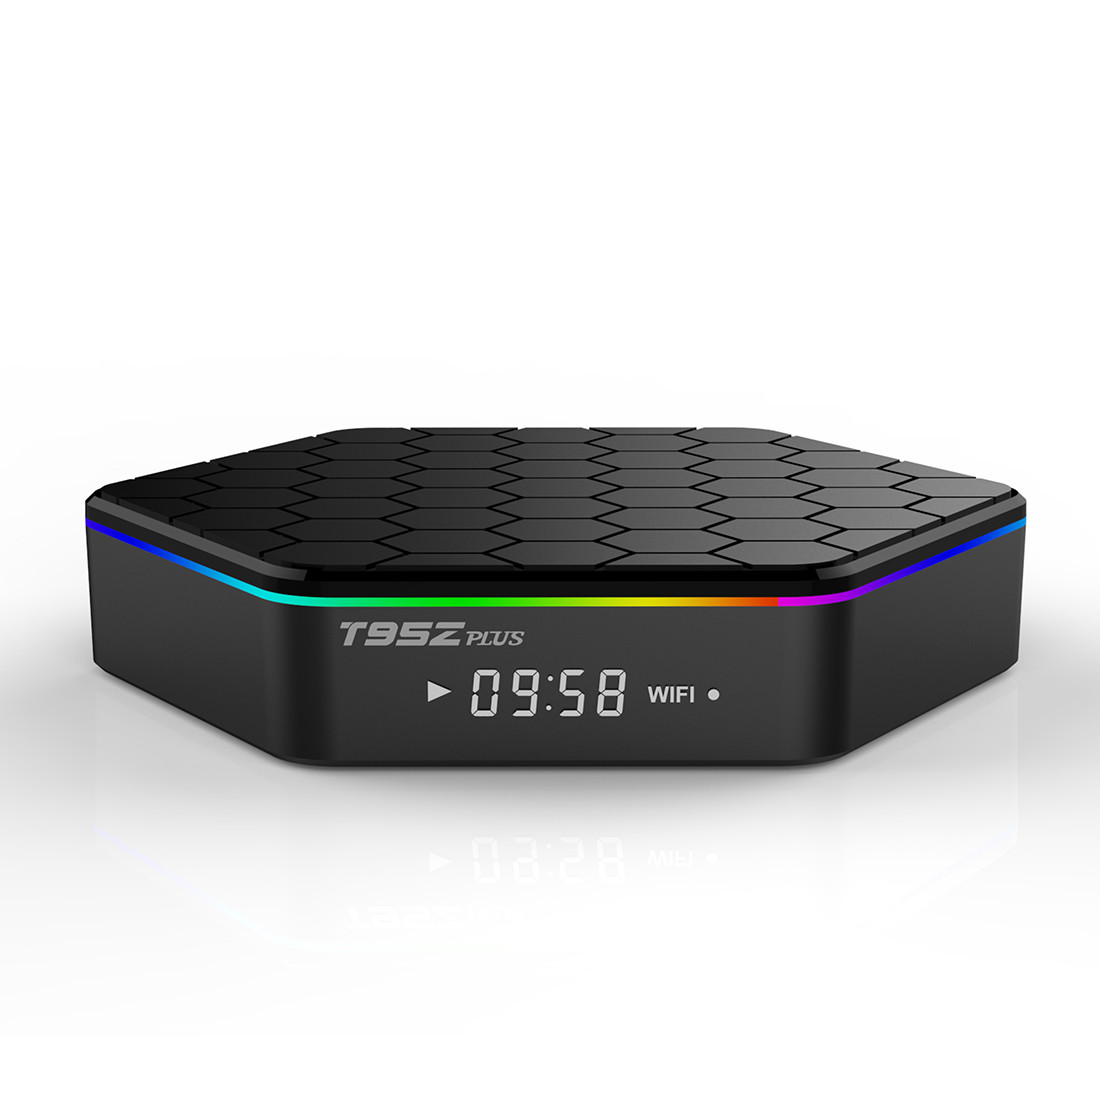  T95Z Plus Amlogic S912 Dual Band Wi-Fi BT 4.0 Streaming Player Manufactures